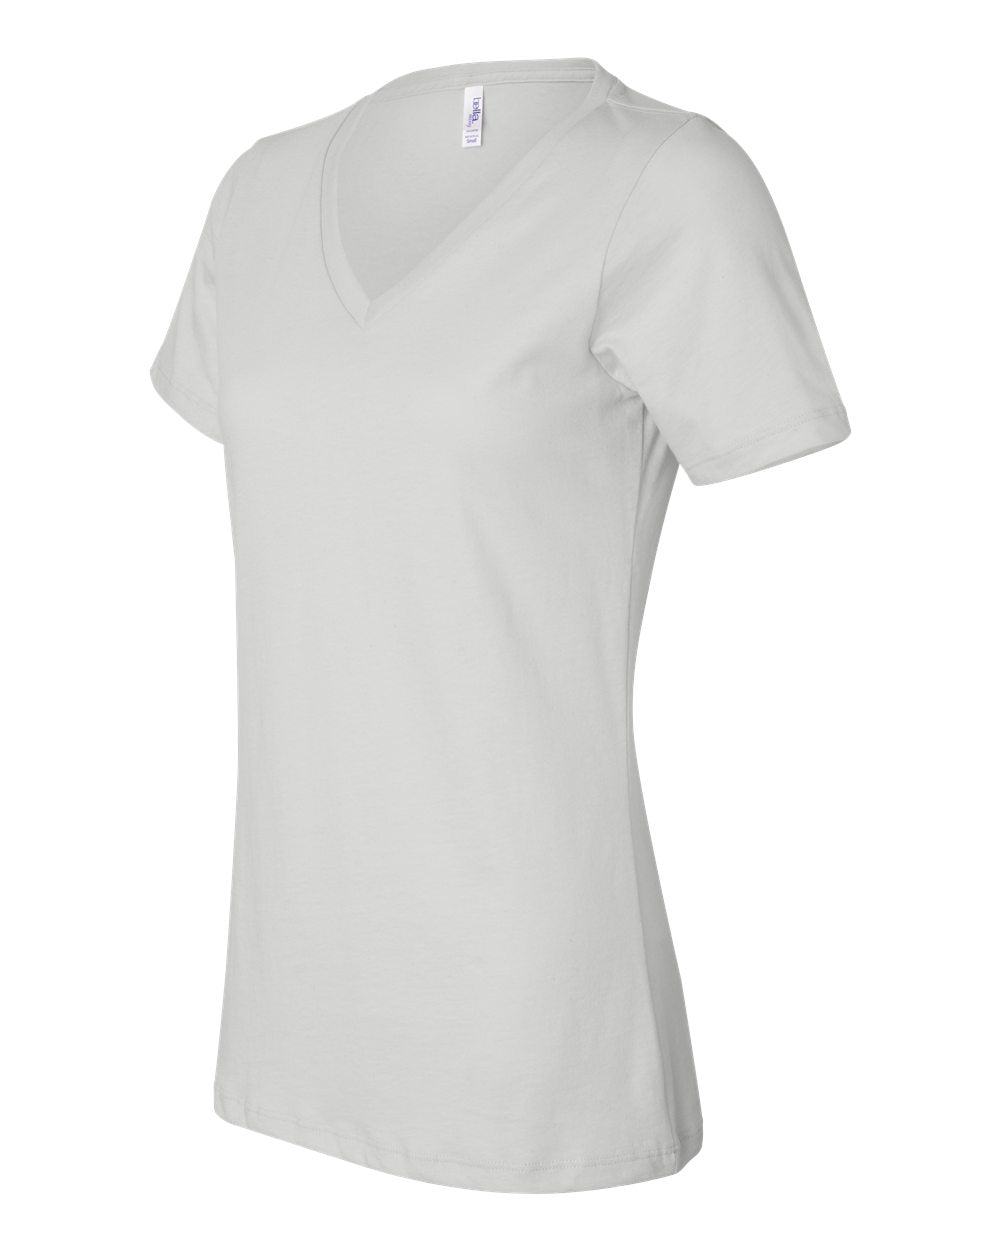 BELLA + CANVAS Women’s Relaxed Jersey V-Neck Tee 6405 #color_White